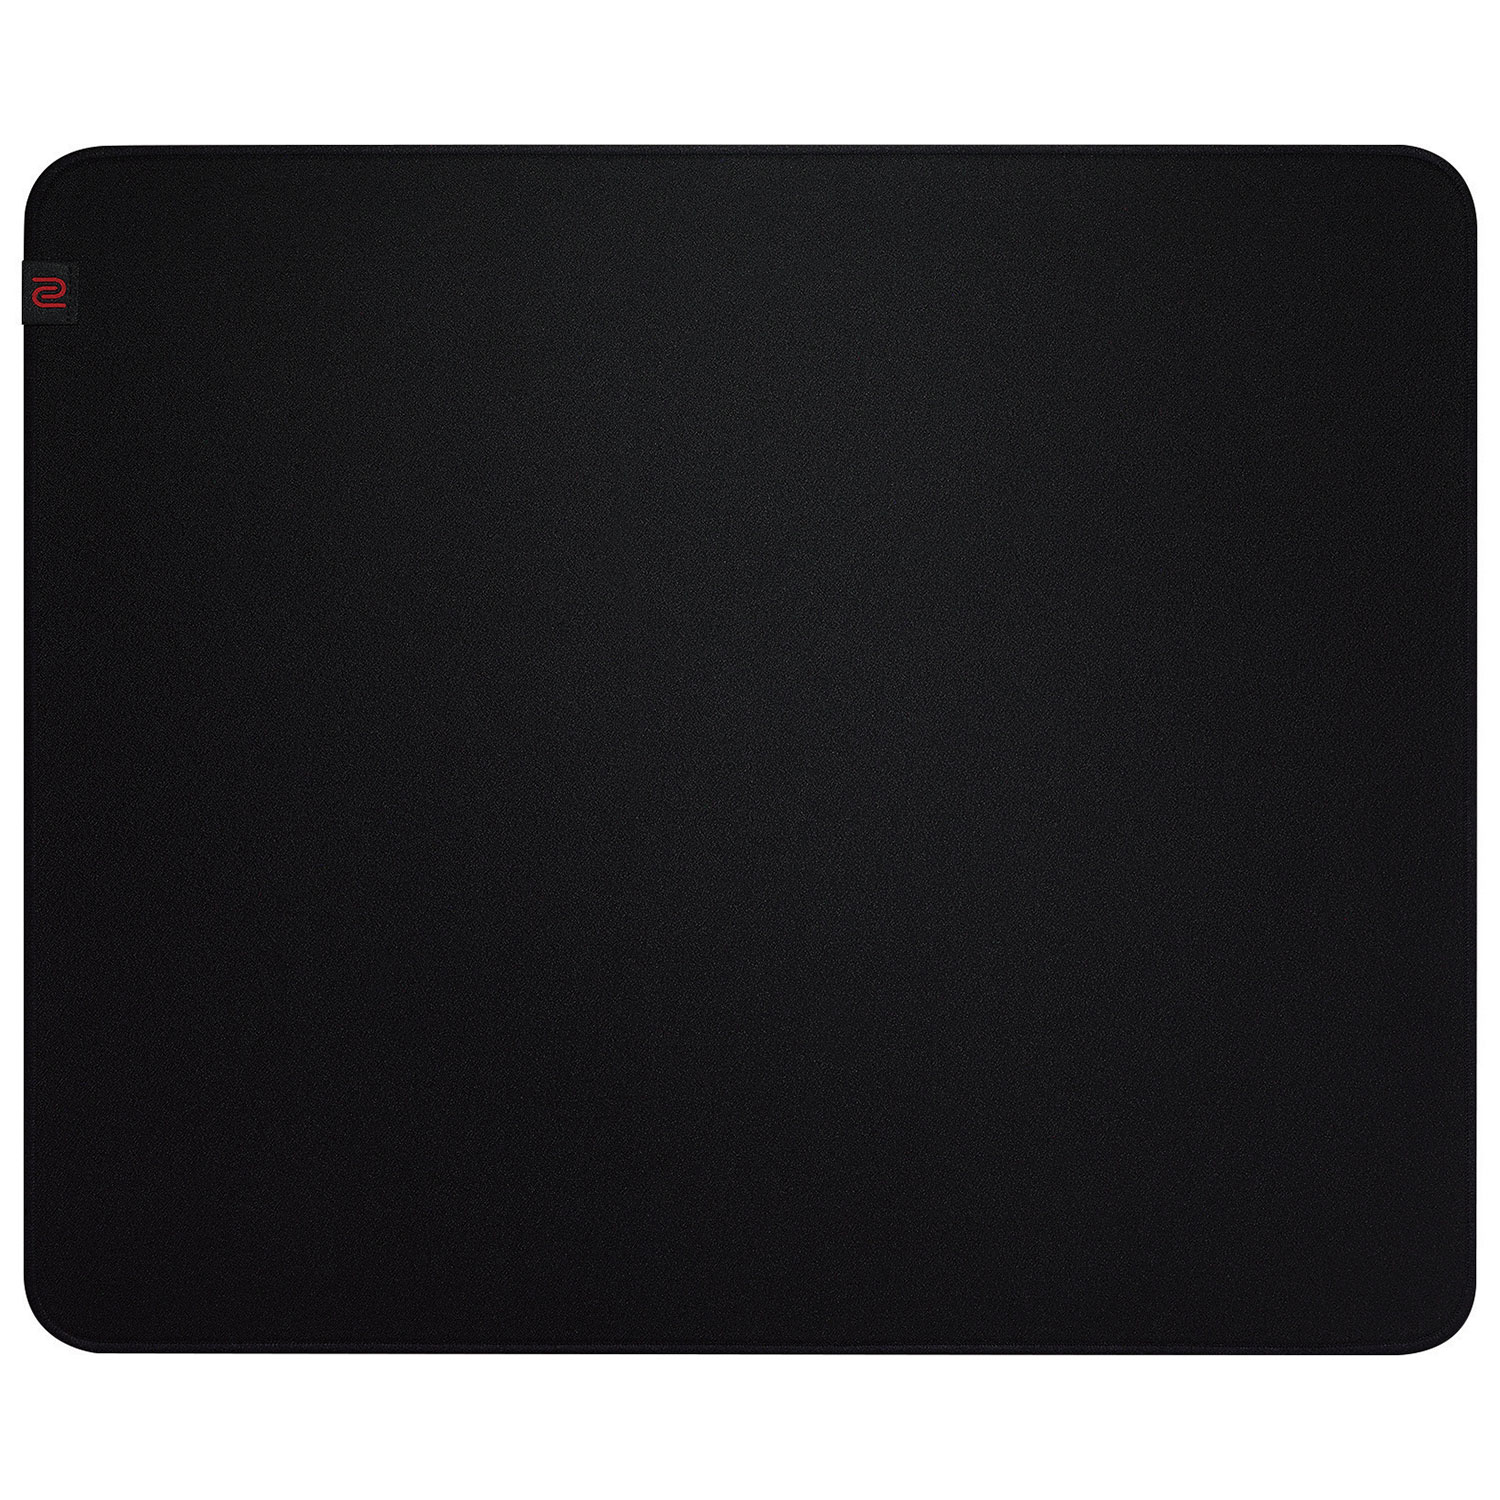 Benq Zowie G Sr Gaming Mouse Pad Black Best Buy Canada